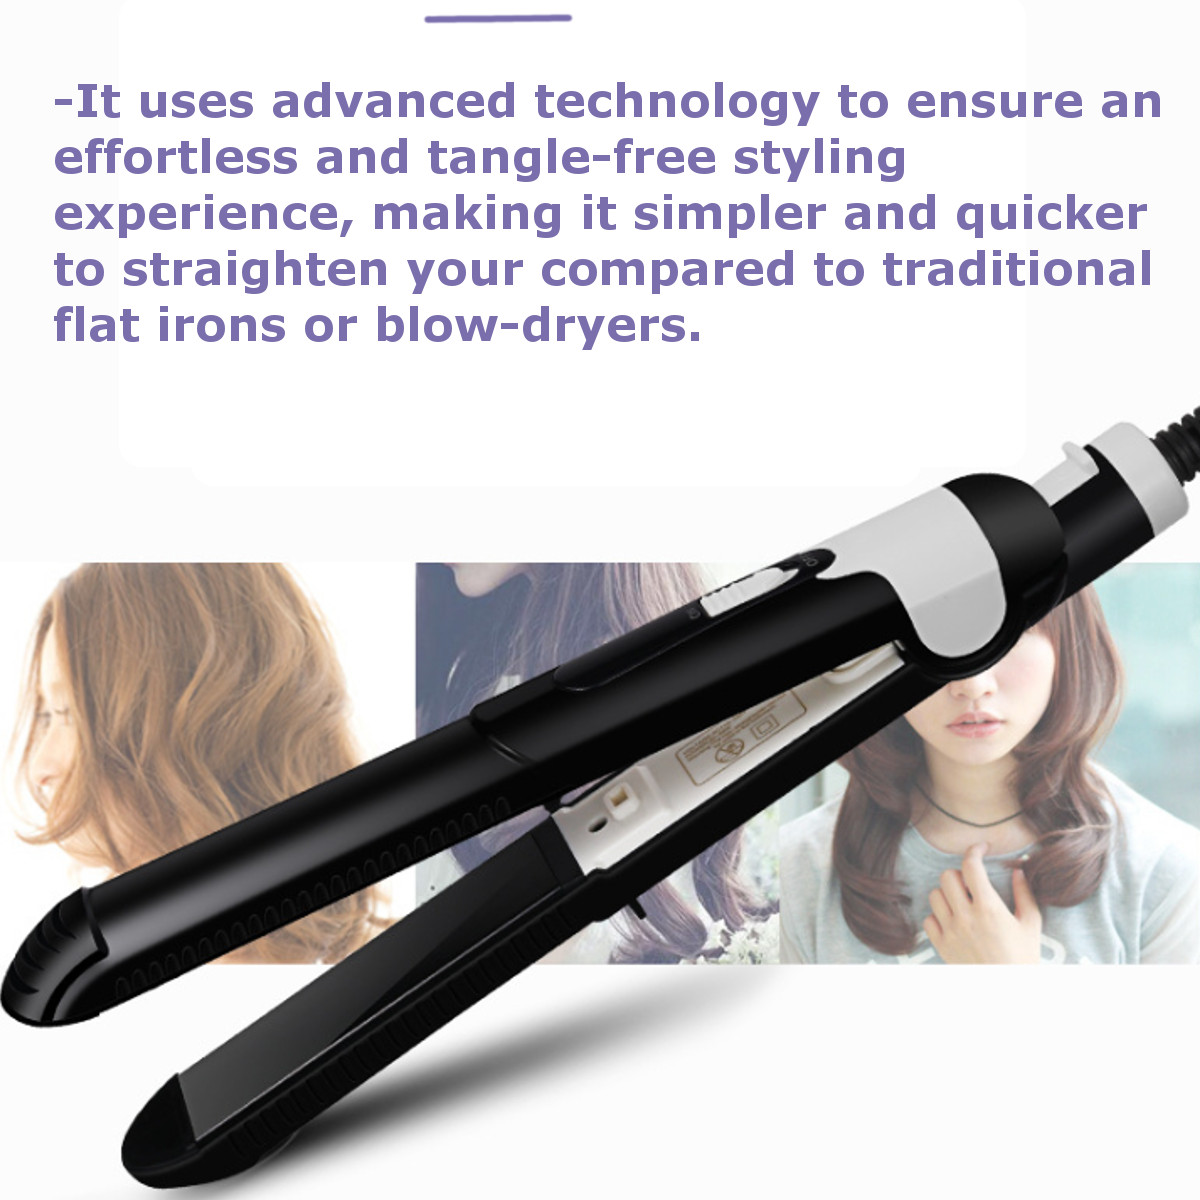 2-In-1-Portable-Curler-Straightener-Tourmaline-Ionic-Flat-Iron-Heat-Up-Fast-220V-Hair-Curler-1606091-3